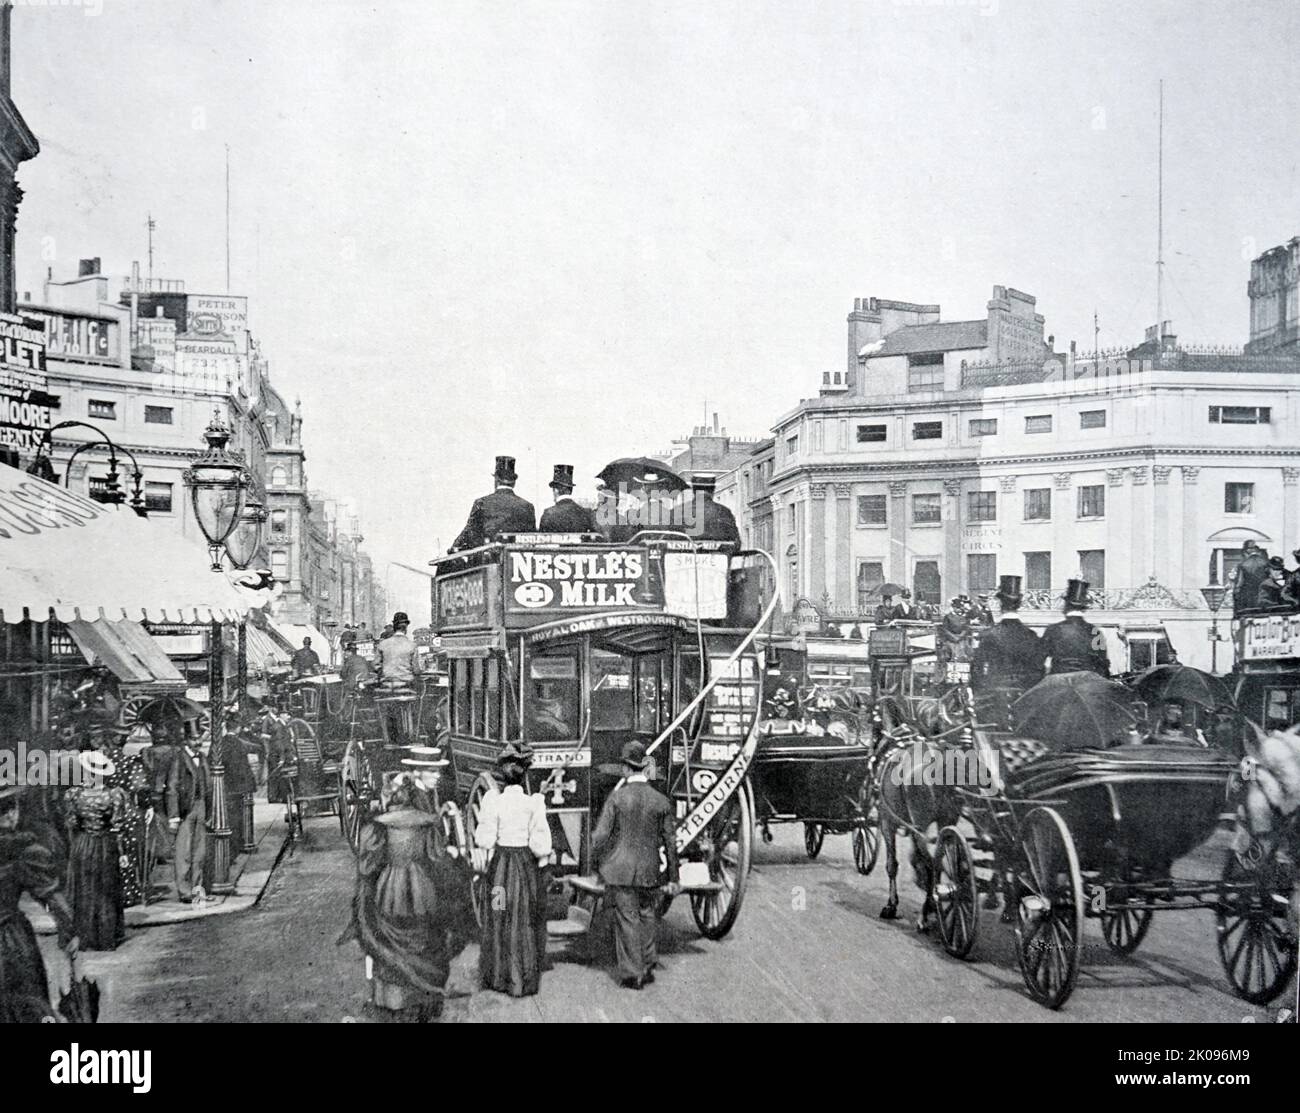 Vintage photograph of London in late Victorian era, England, 1895. Stock Photo